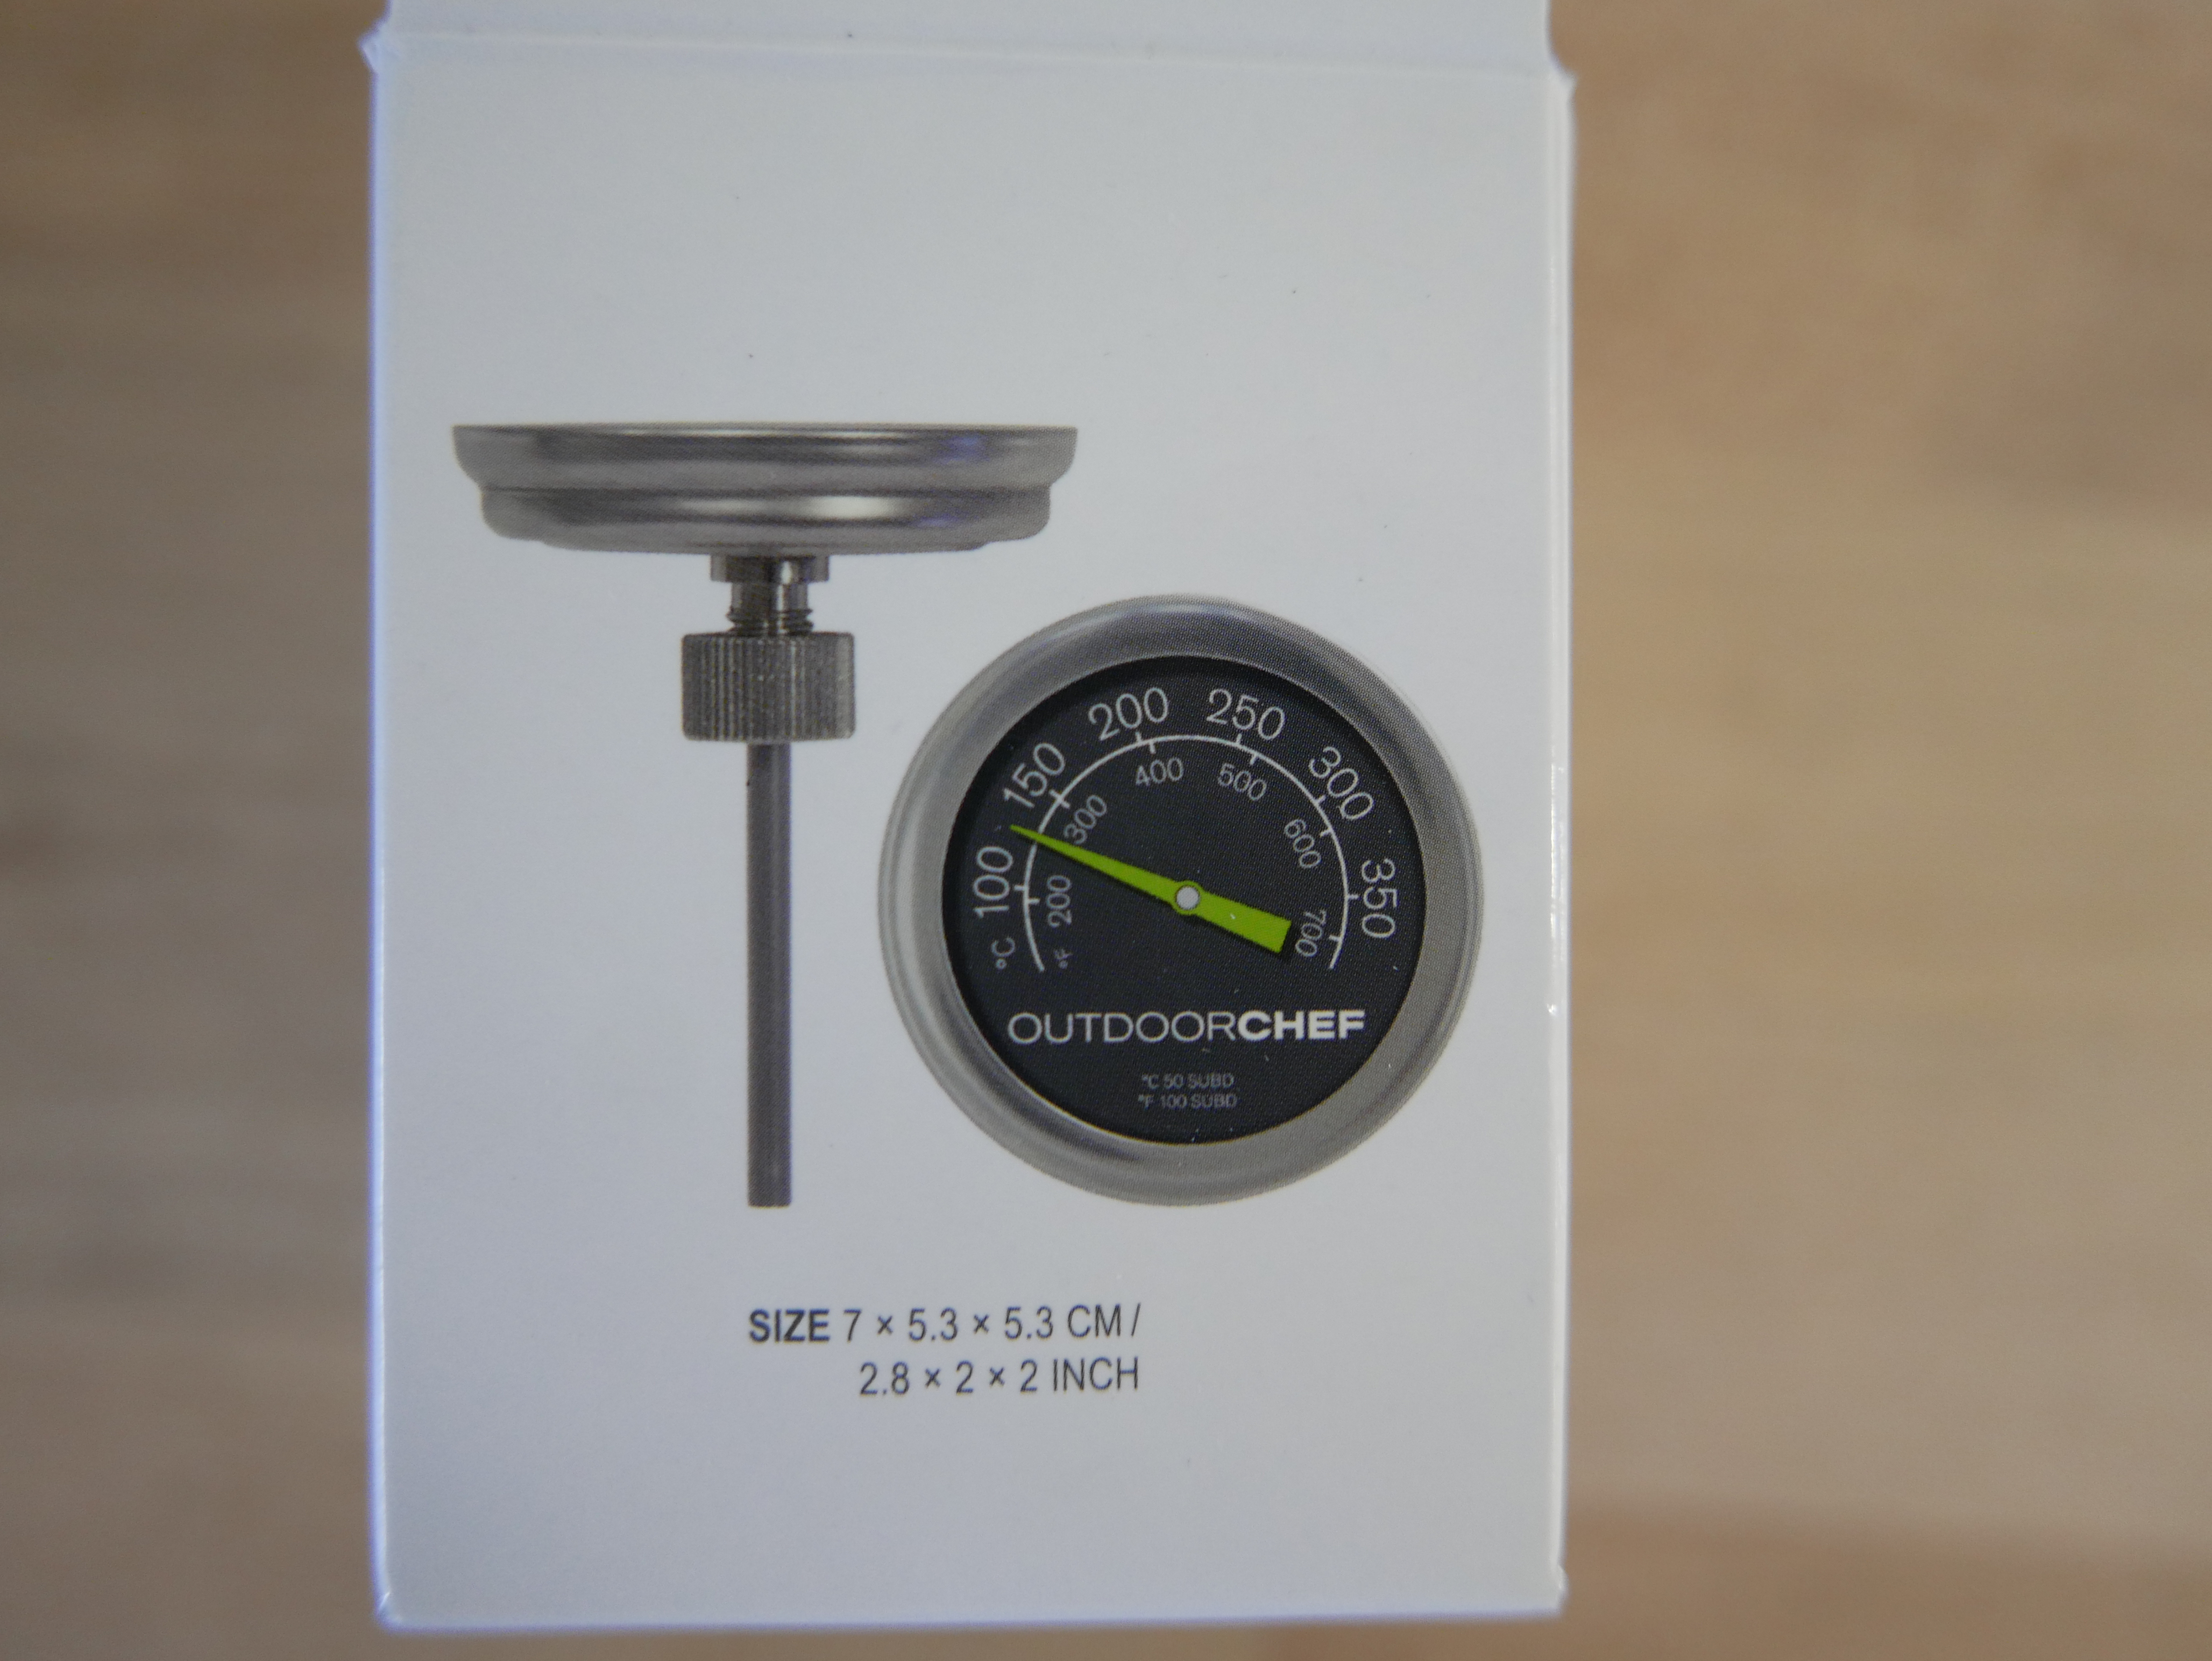 Outdoorchef universele thermometer voor BBQ